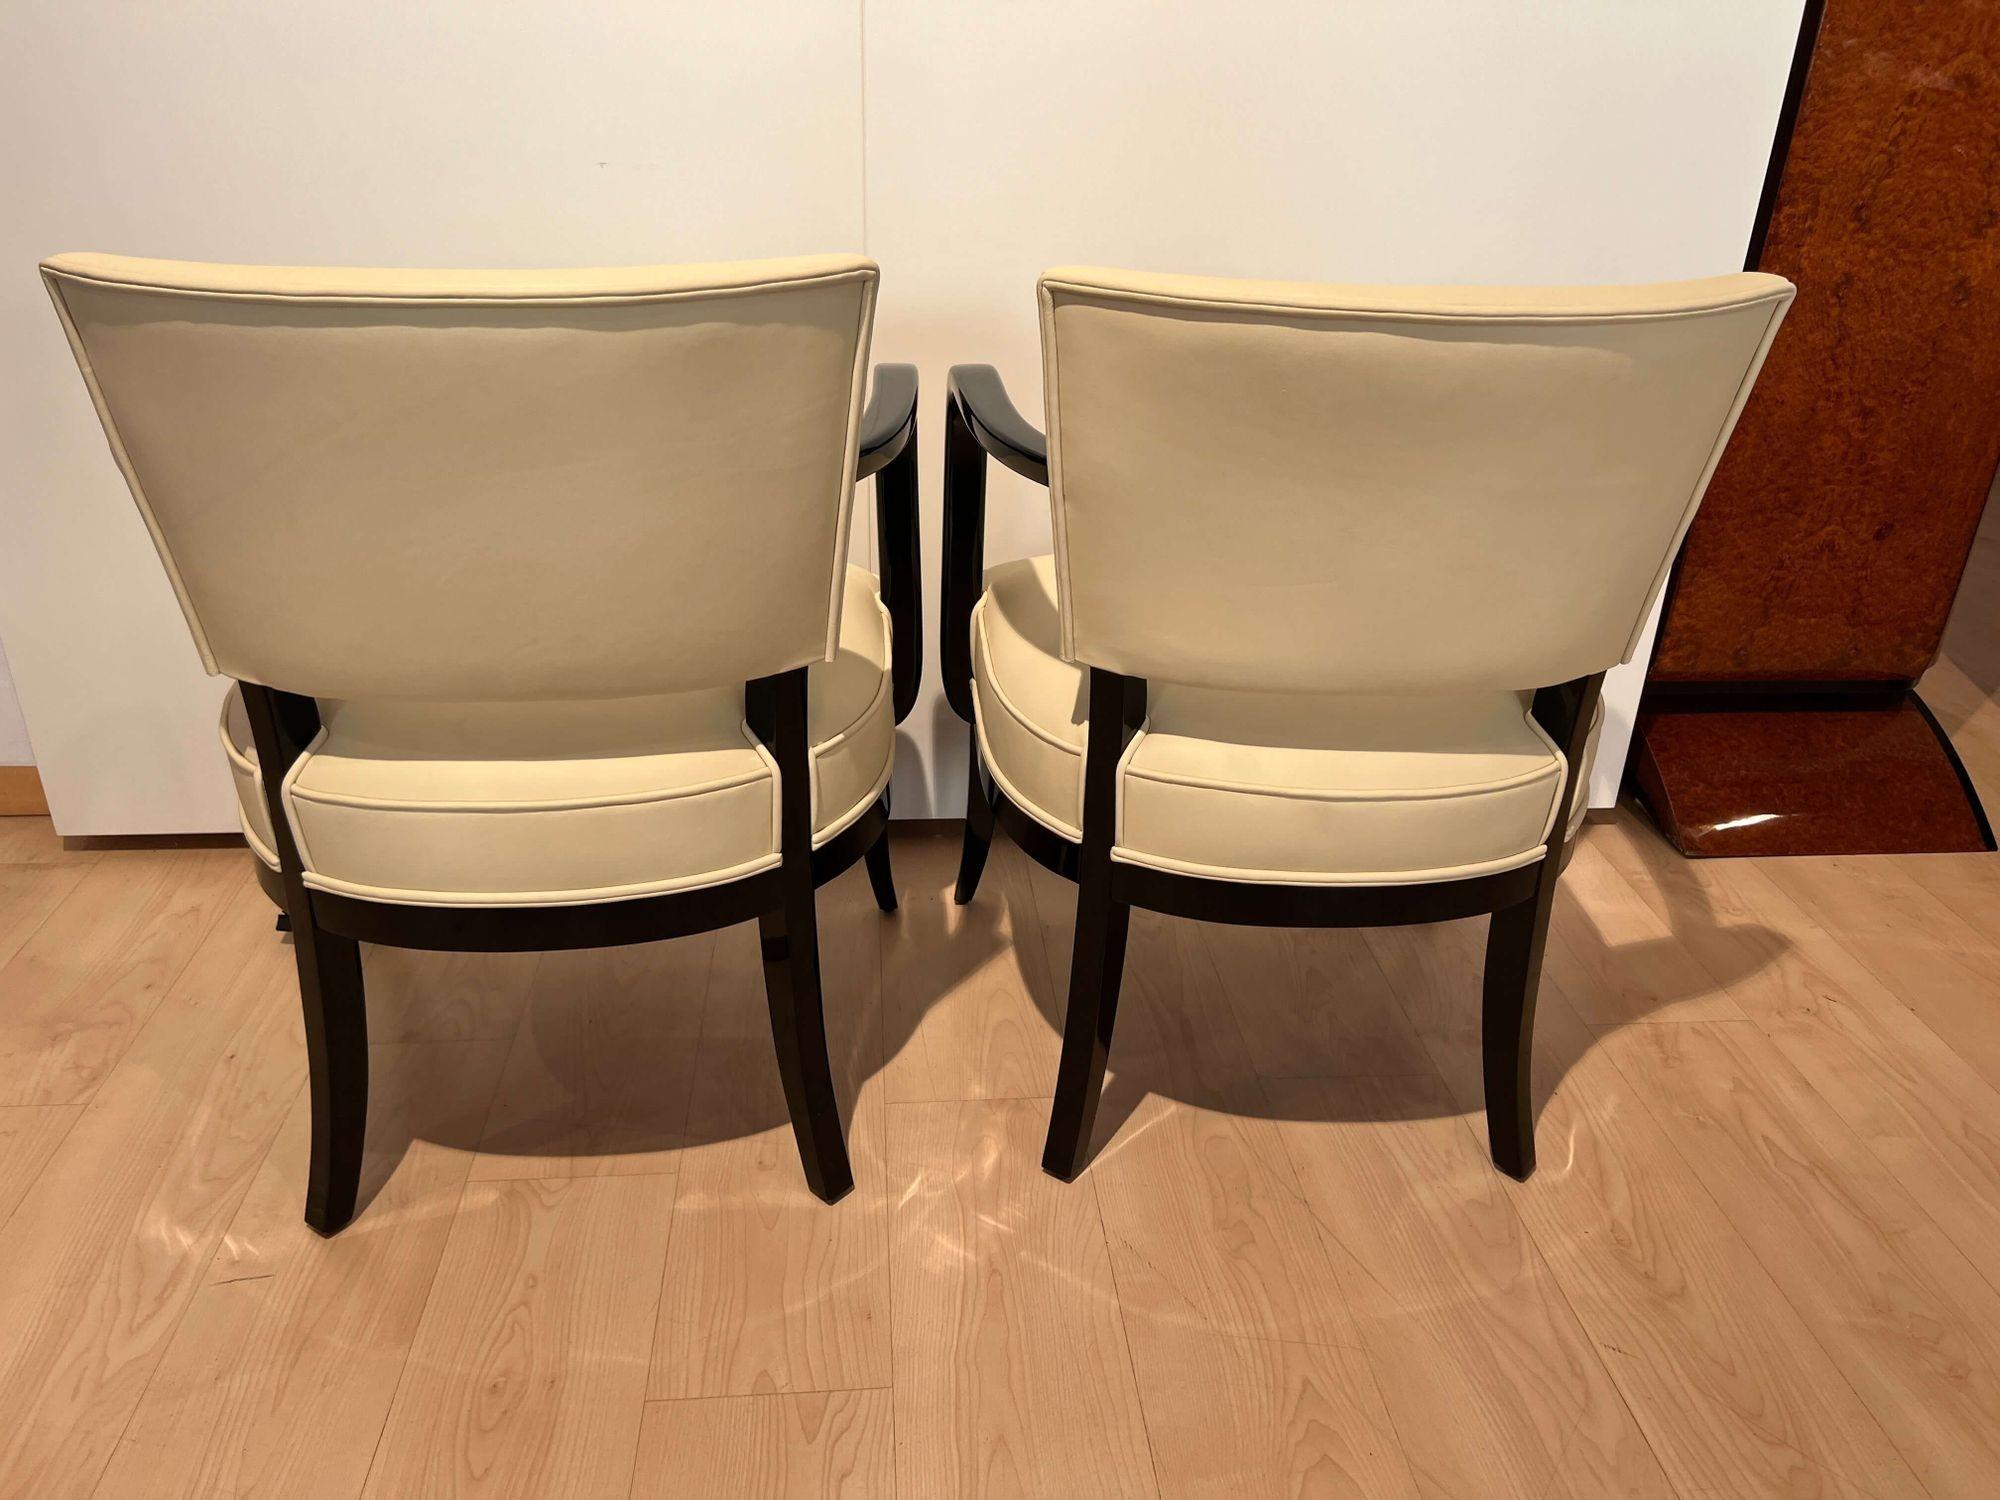 Pair of Art Deco Armchairs, Black Lacquer, Creme Leather, France, 1930s For Sale 11